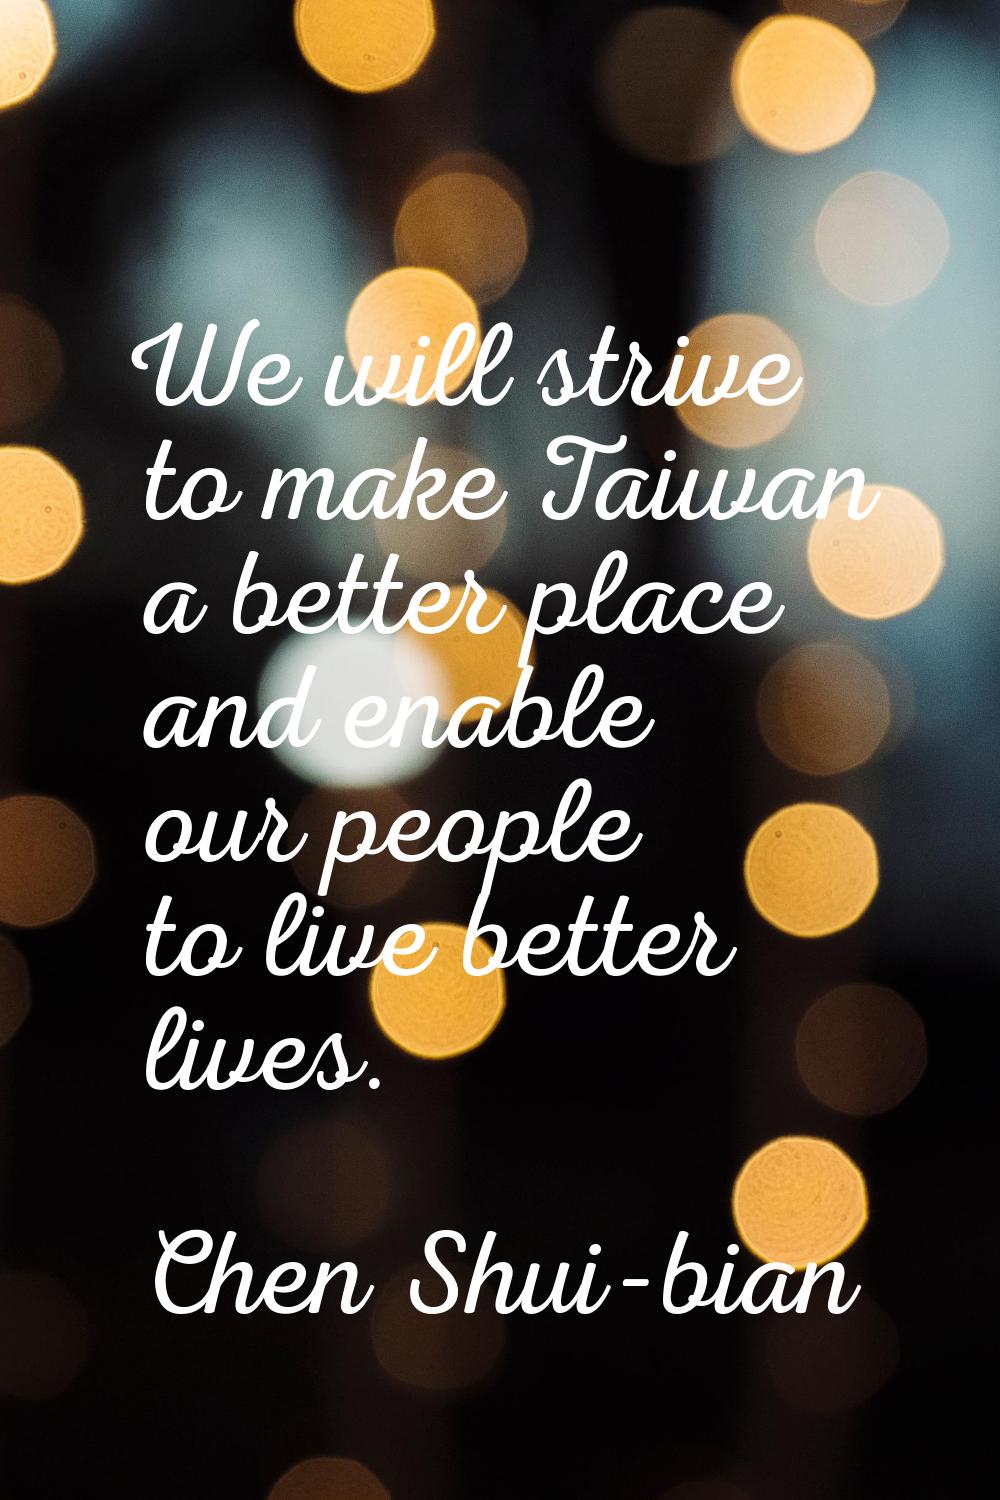 We will strive to make Taiwan a better place and enable our people to live better lives.